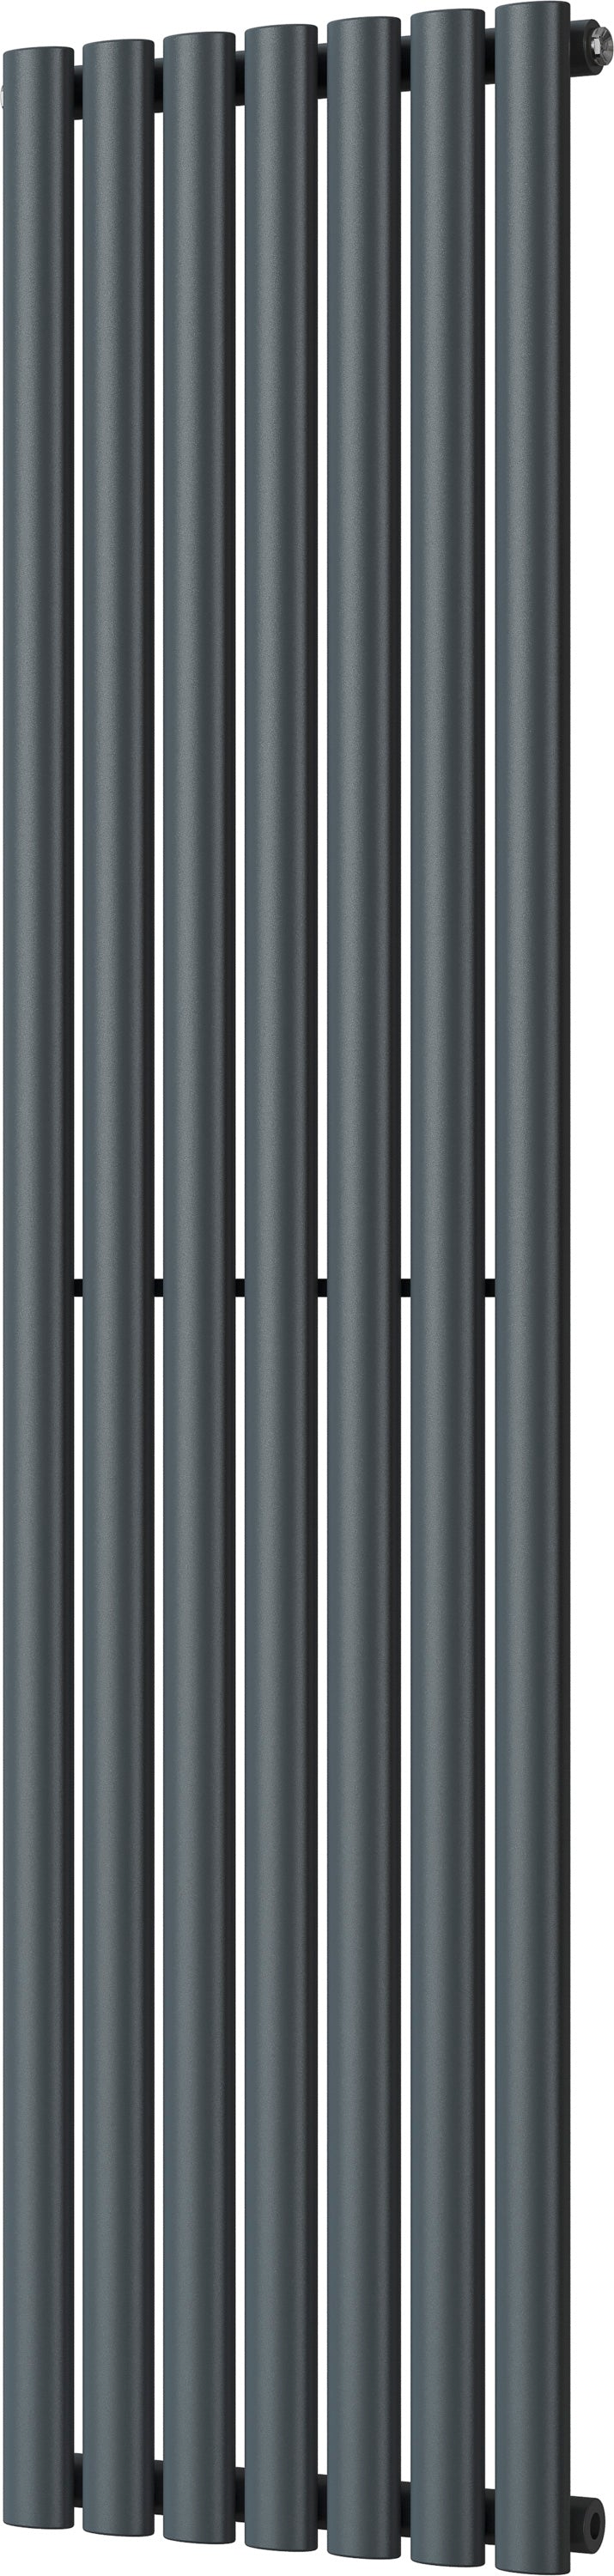 Omeara - Anthracite Vertical Radiator H1600mm x W406mm Single Panel